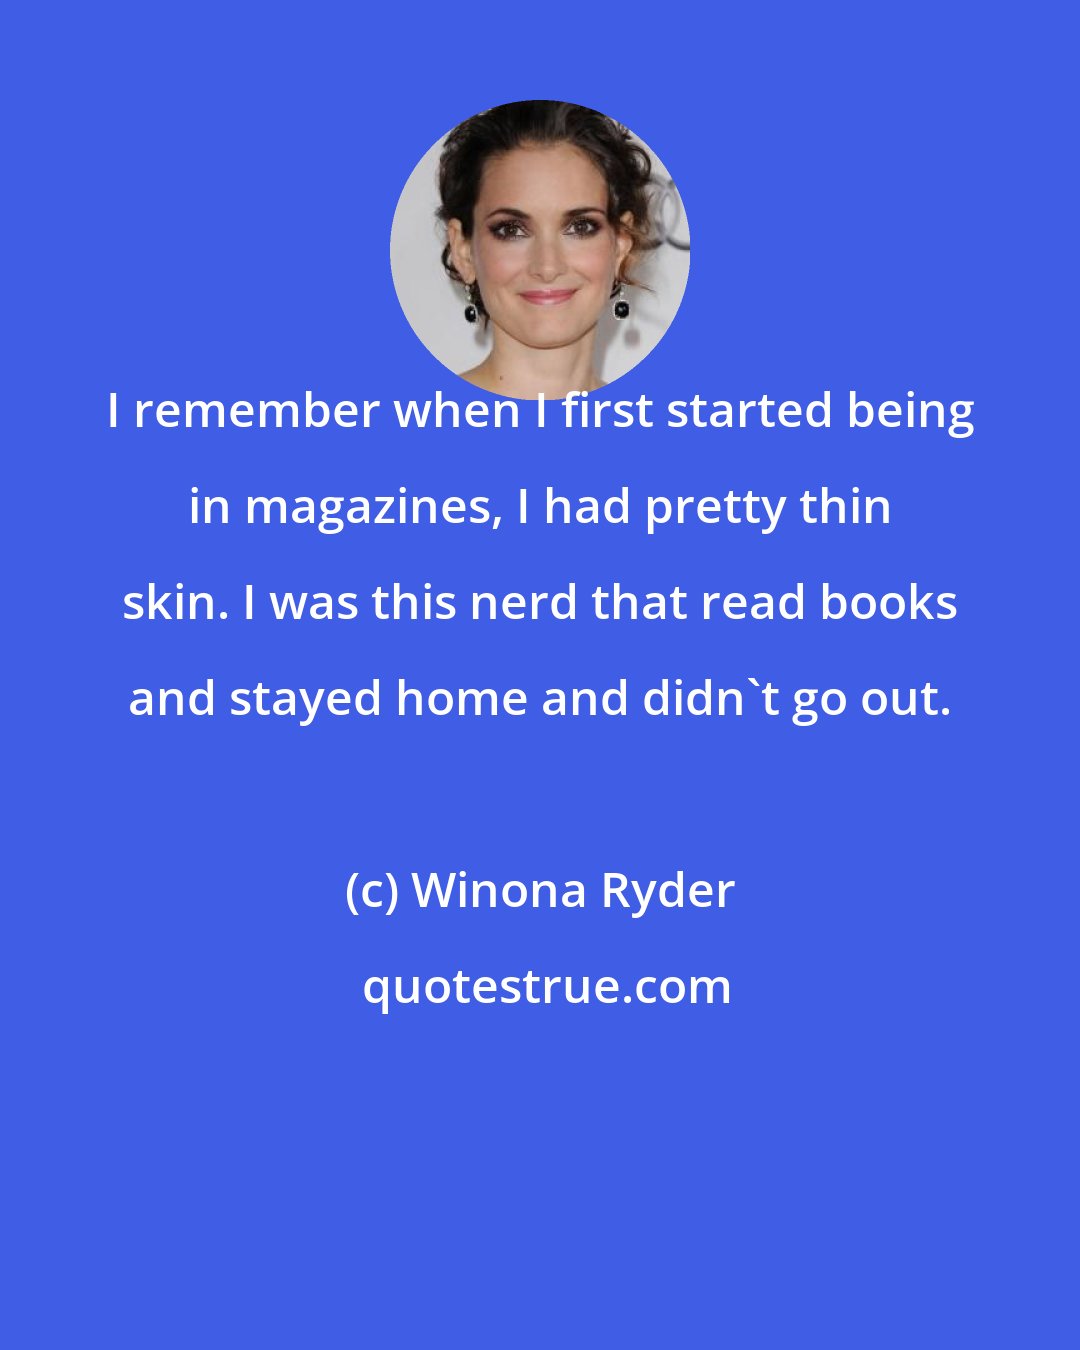 Winona Ryder: I remember when I first started being in magazines, I had pretty thin skin. I was this nerd that read books and stayed home and didn't go out.